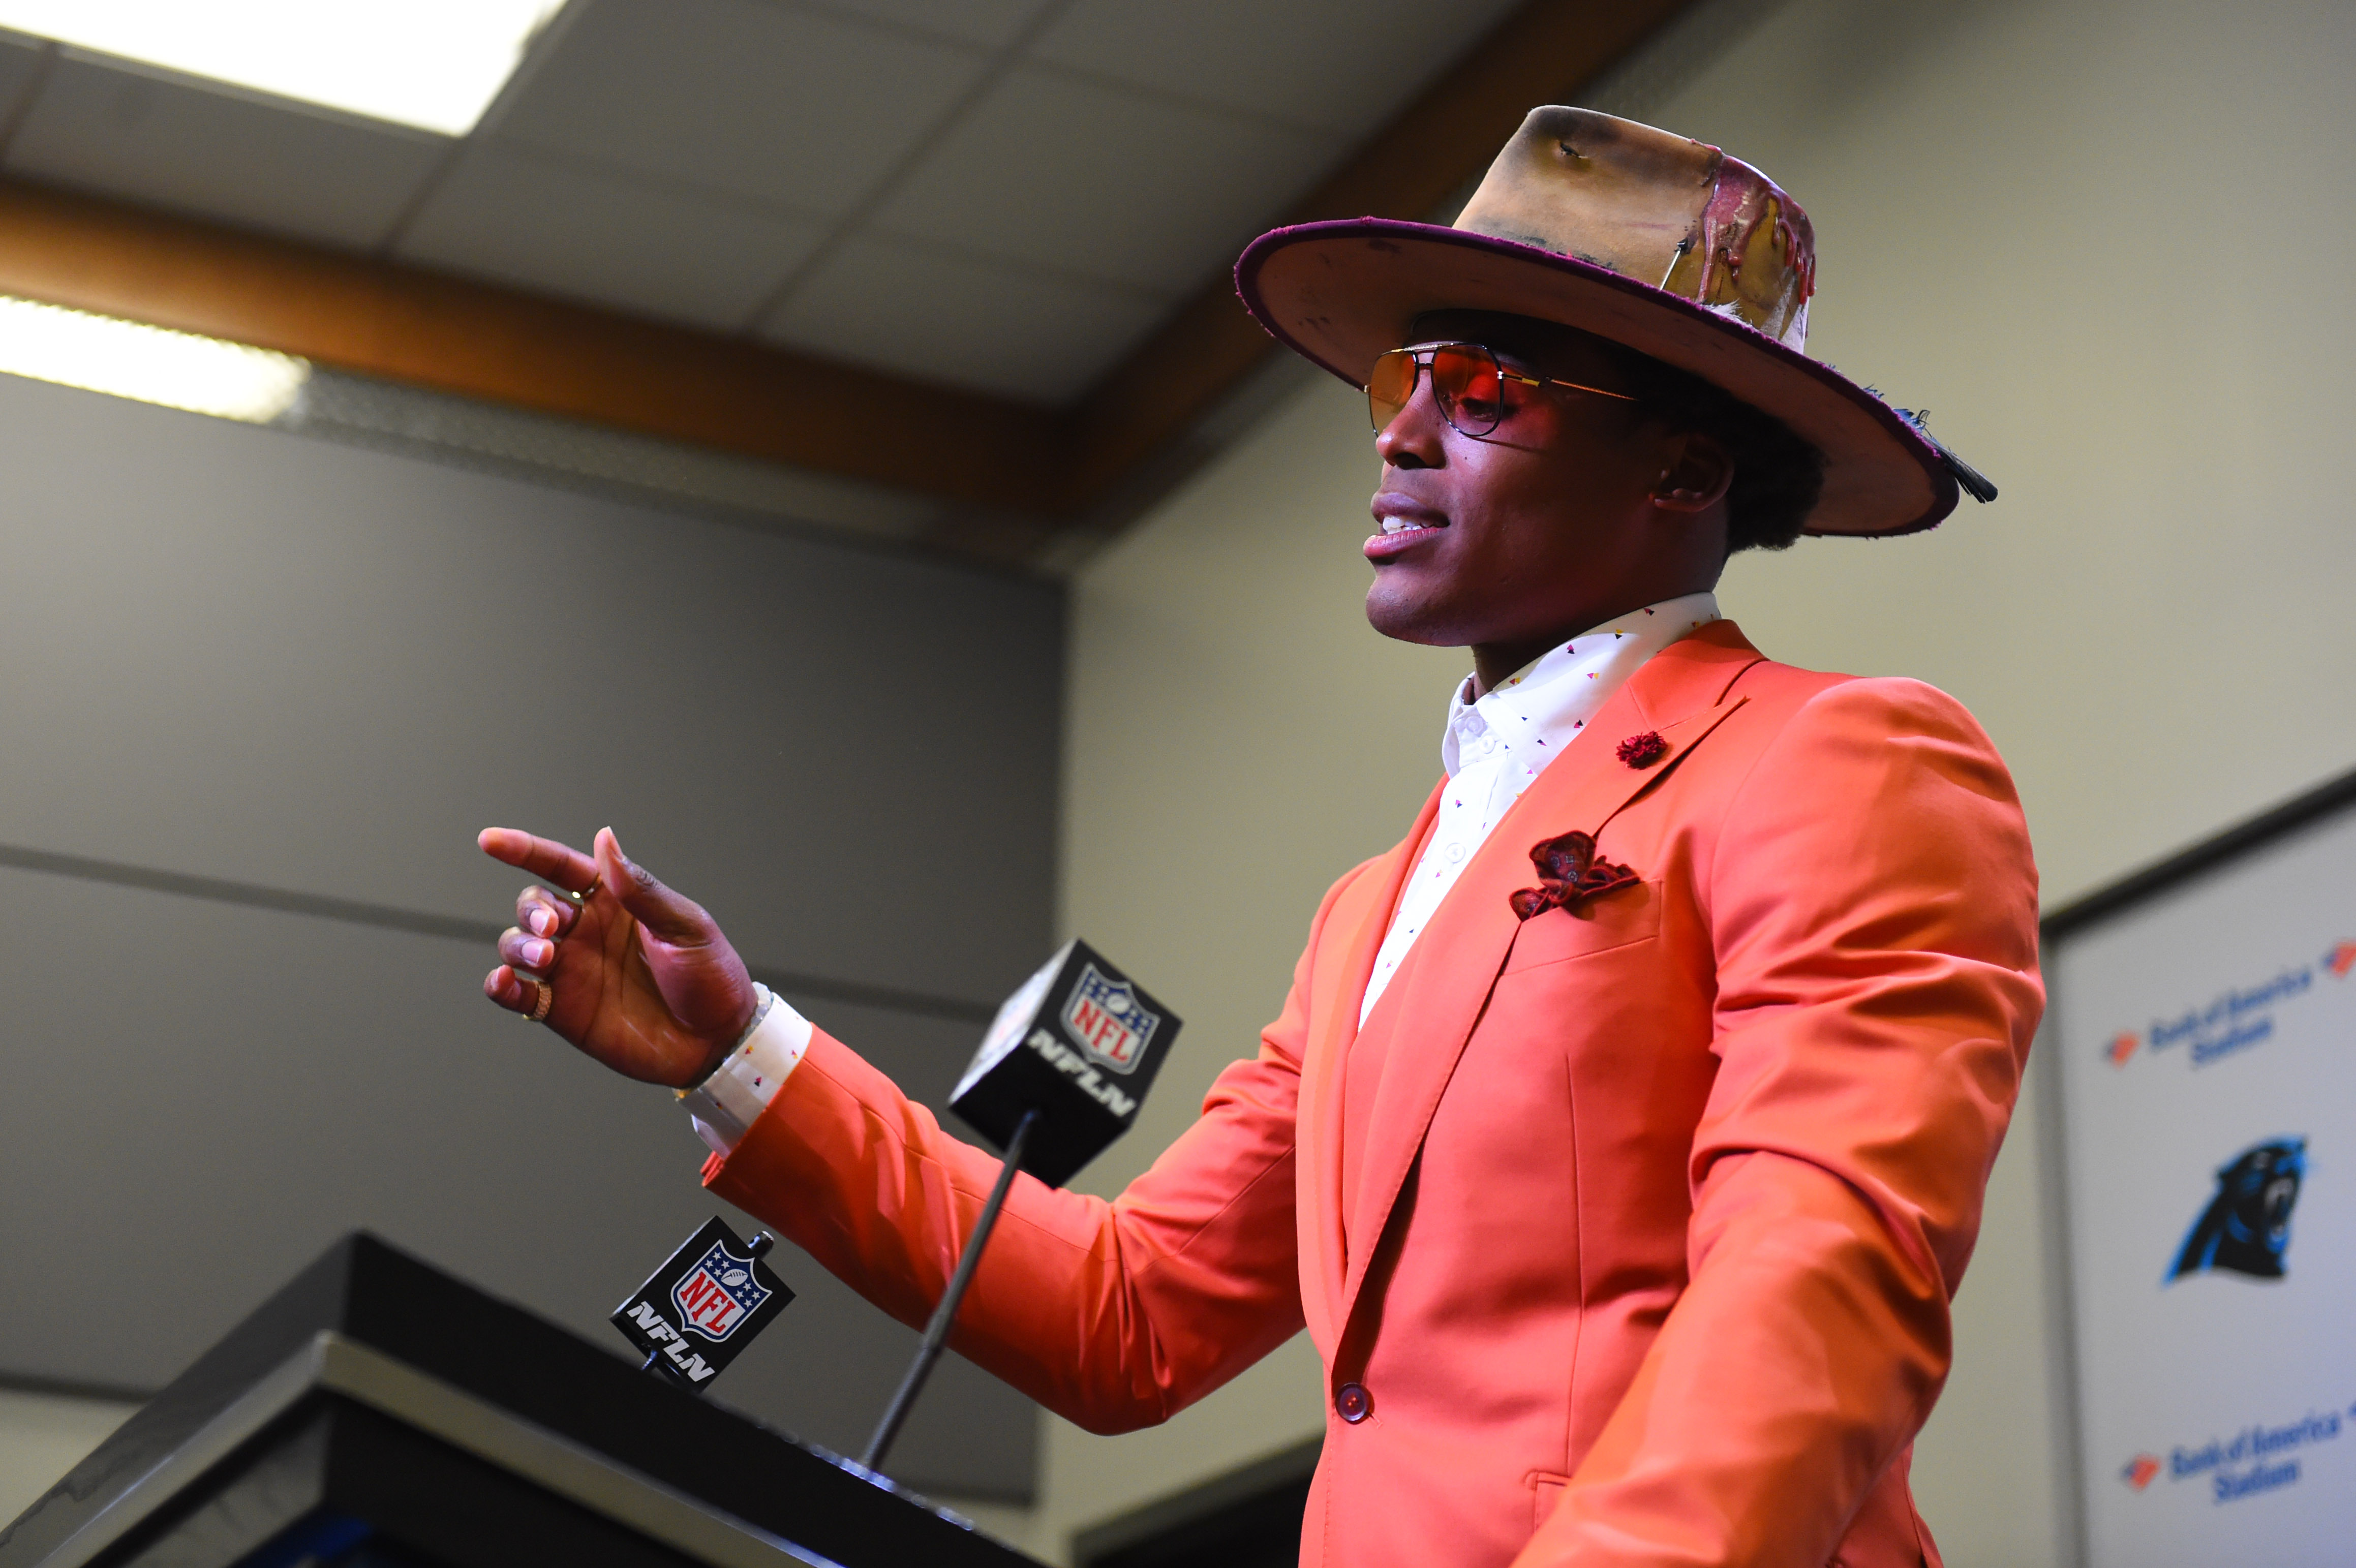 cam newton best outfits - Afla Aten Lor